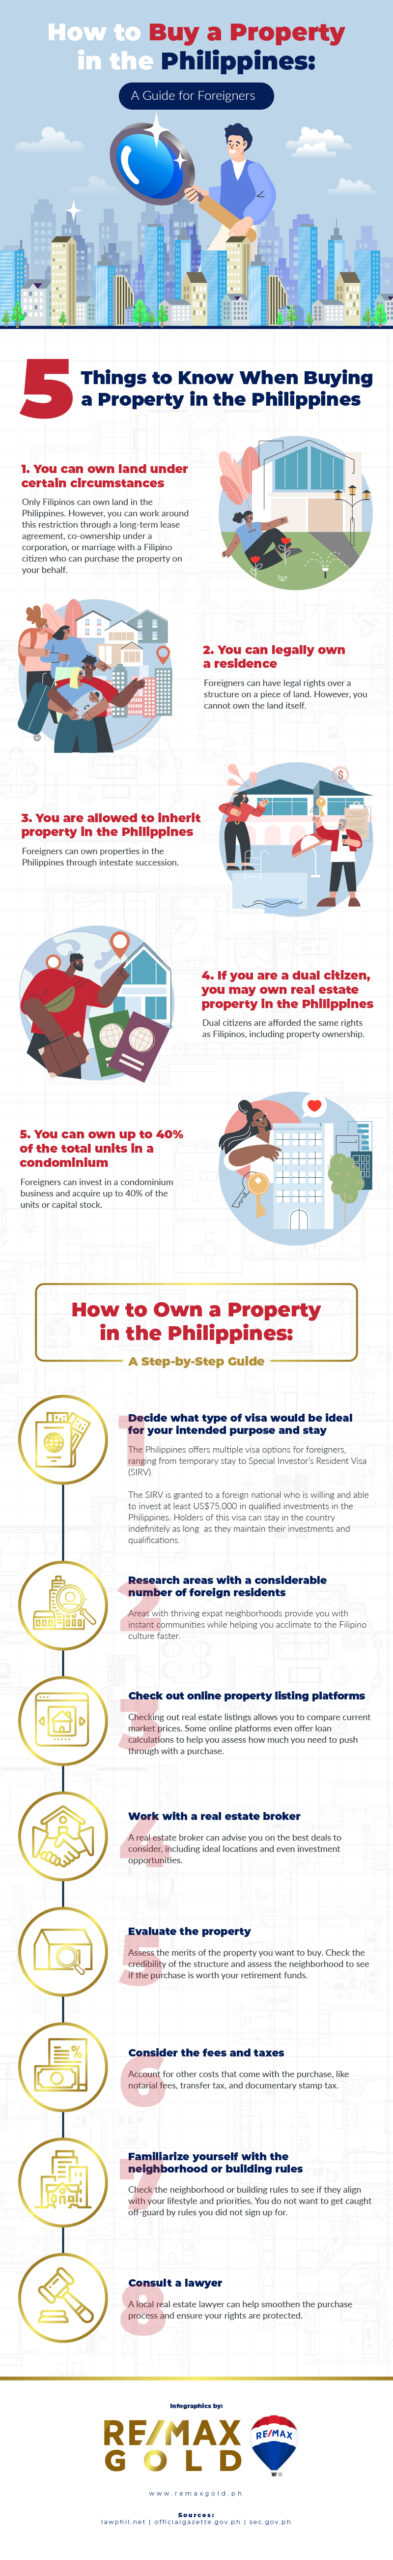 How to buy a home in the Philippines if you're a foreigner infographic